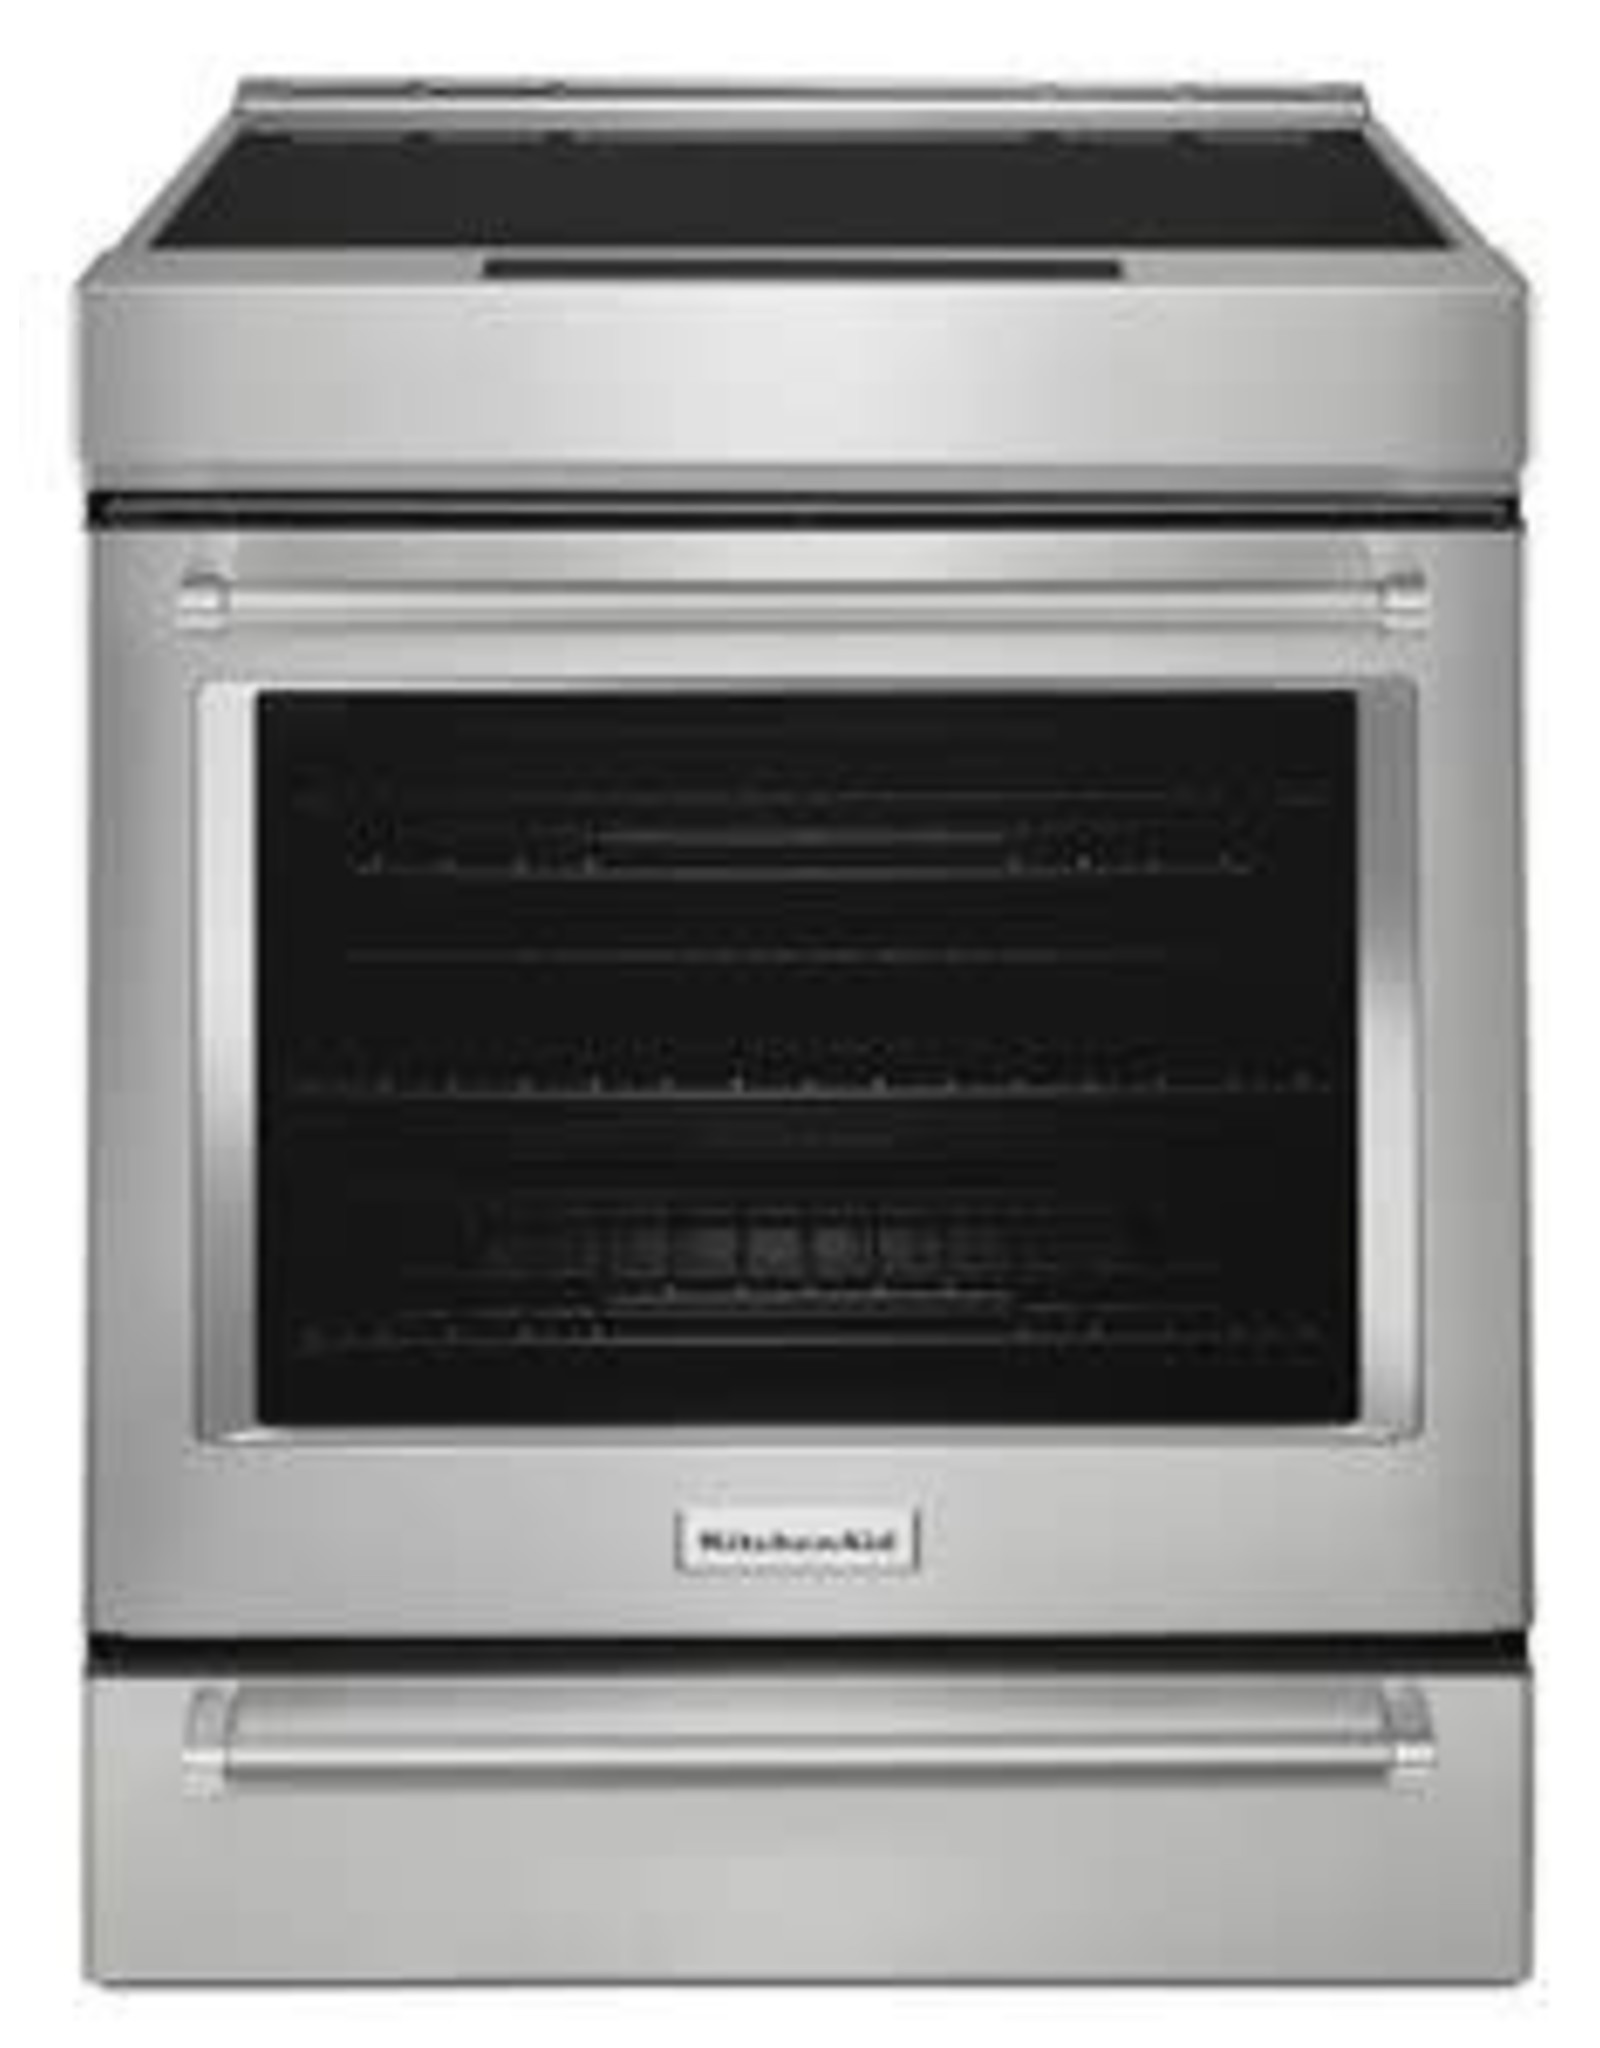 KS1B900ESS 7.1 cu. ft. Slide-In Induction Range with Self-Cleaning Convection Oven in Stainless Steel